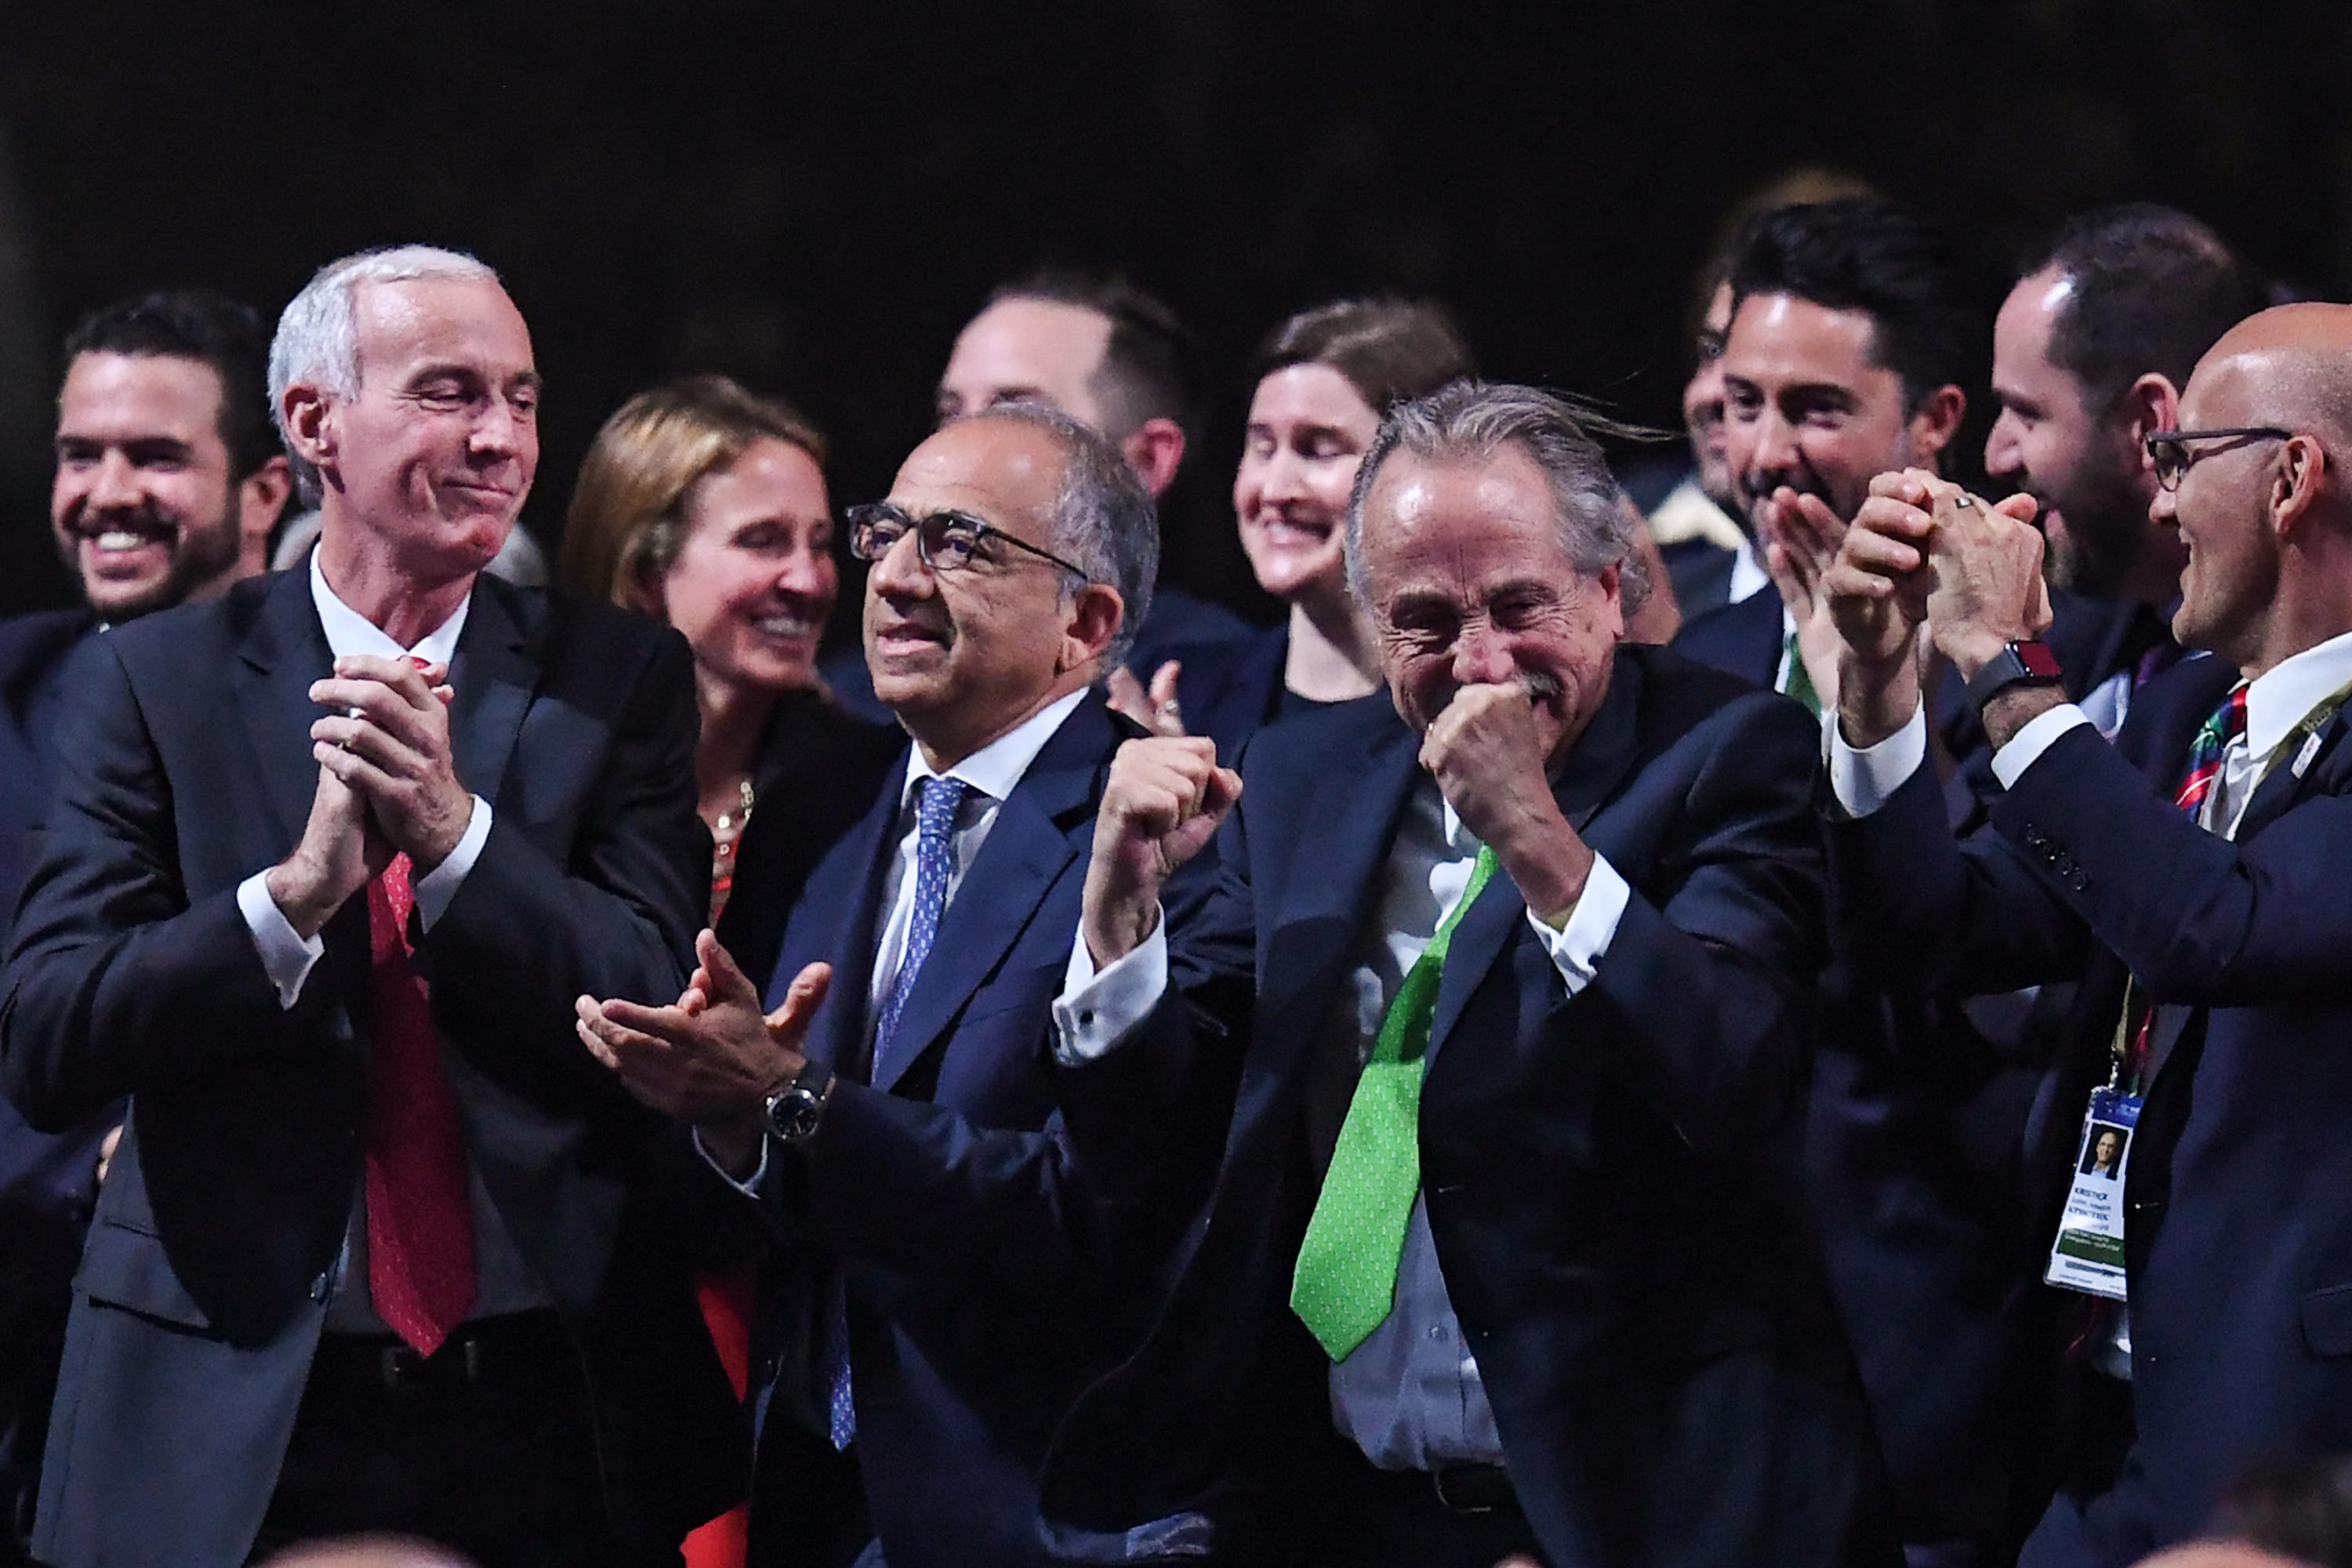 New York, New Jersey Are Ready to Host the 2026 FIFA World Cup Final –